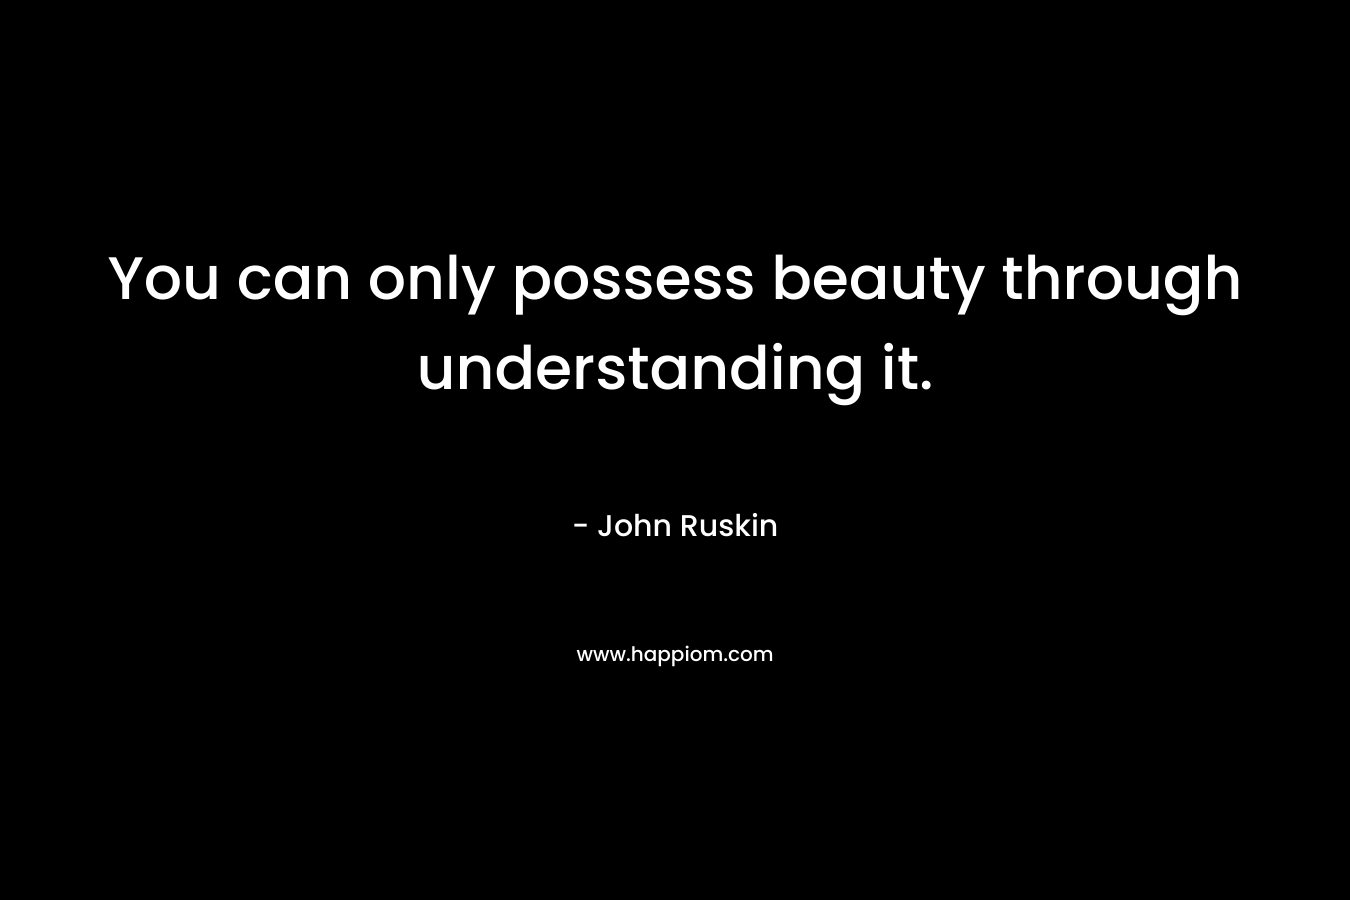 You can only possess beauty through understanding it.